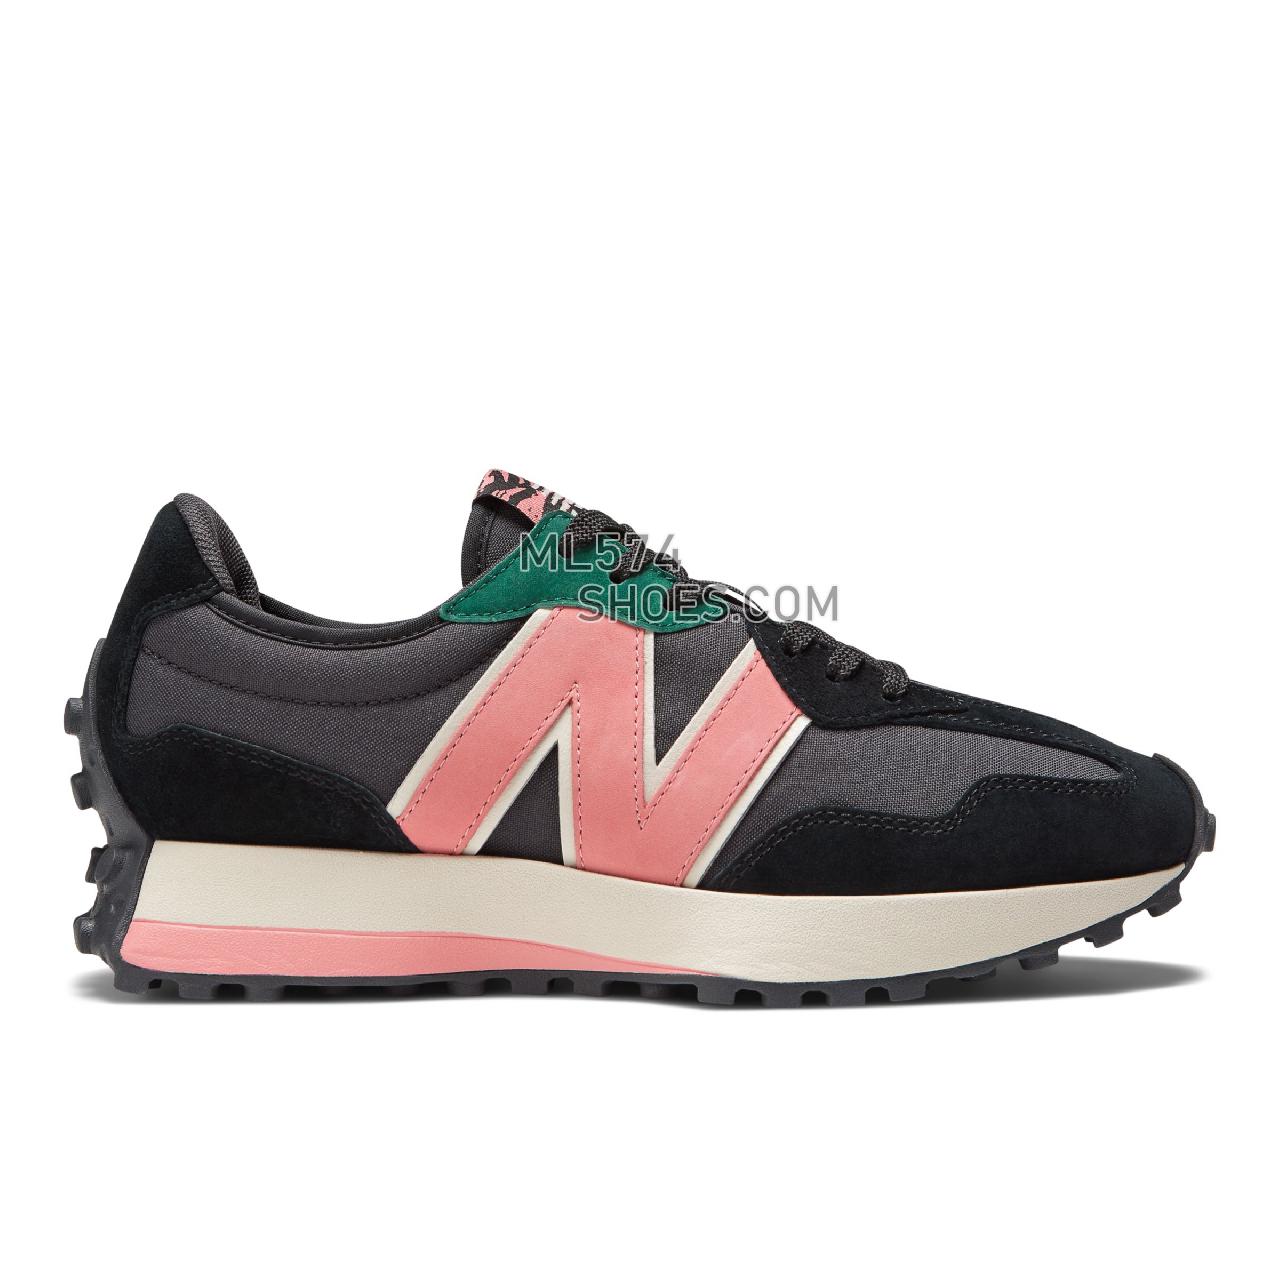 New Balance 327 - Unisex Men's Women's Sport Style Sneakers - Black with Natural Pink - U327CNT